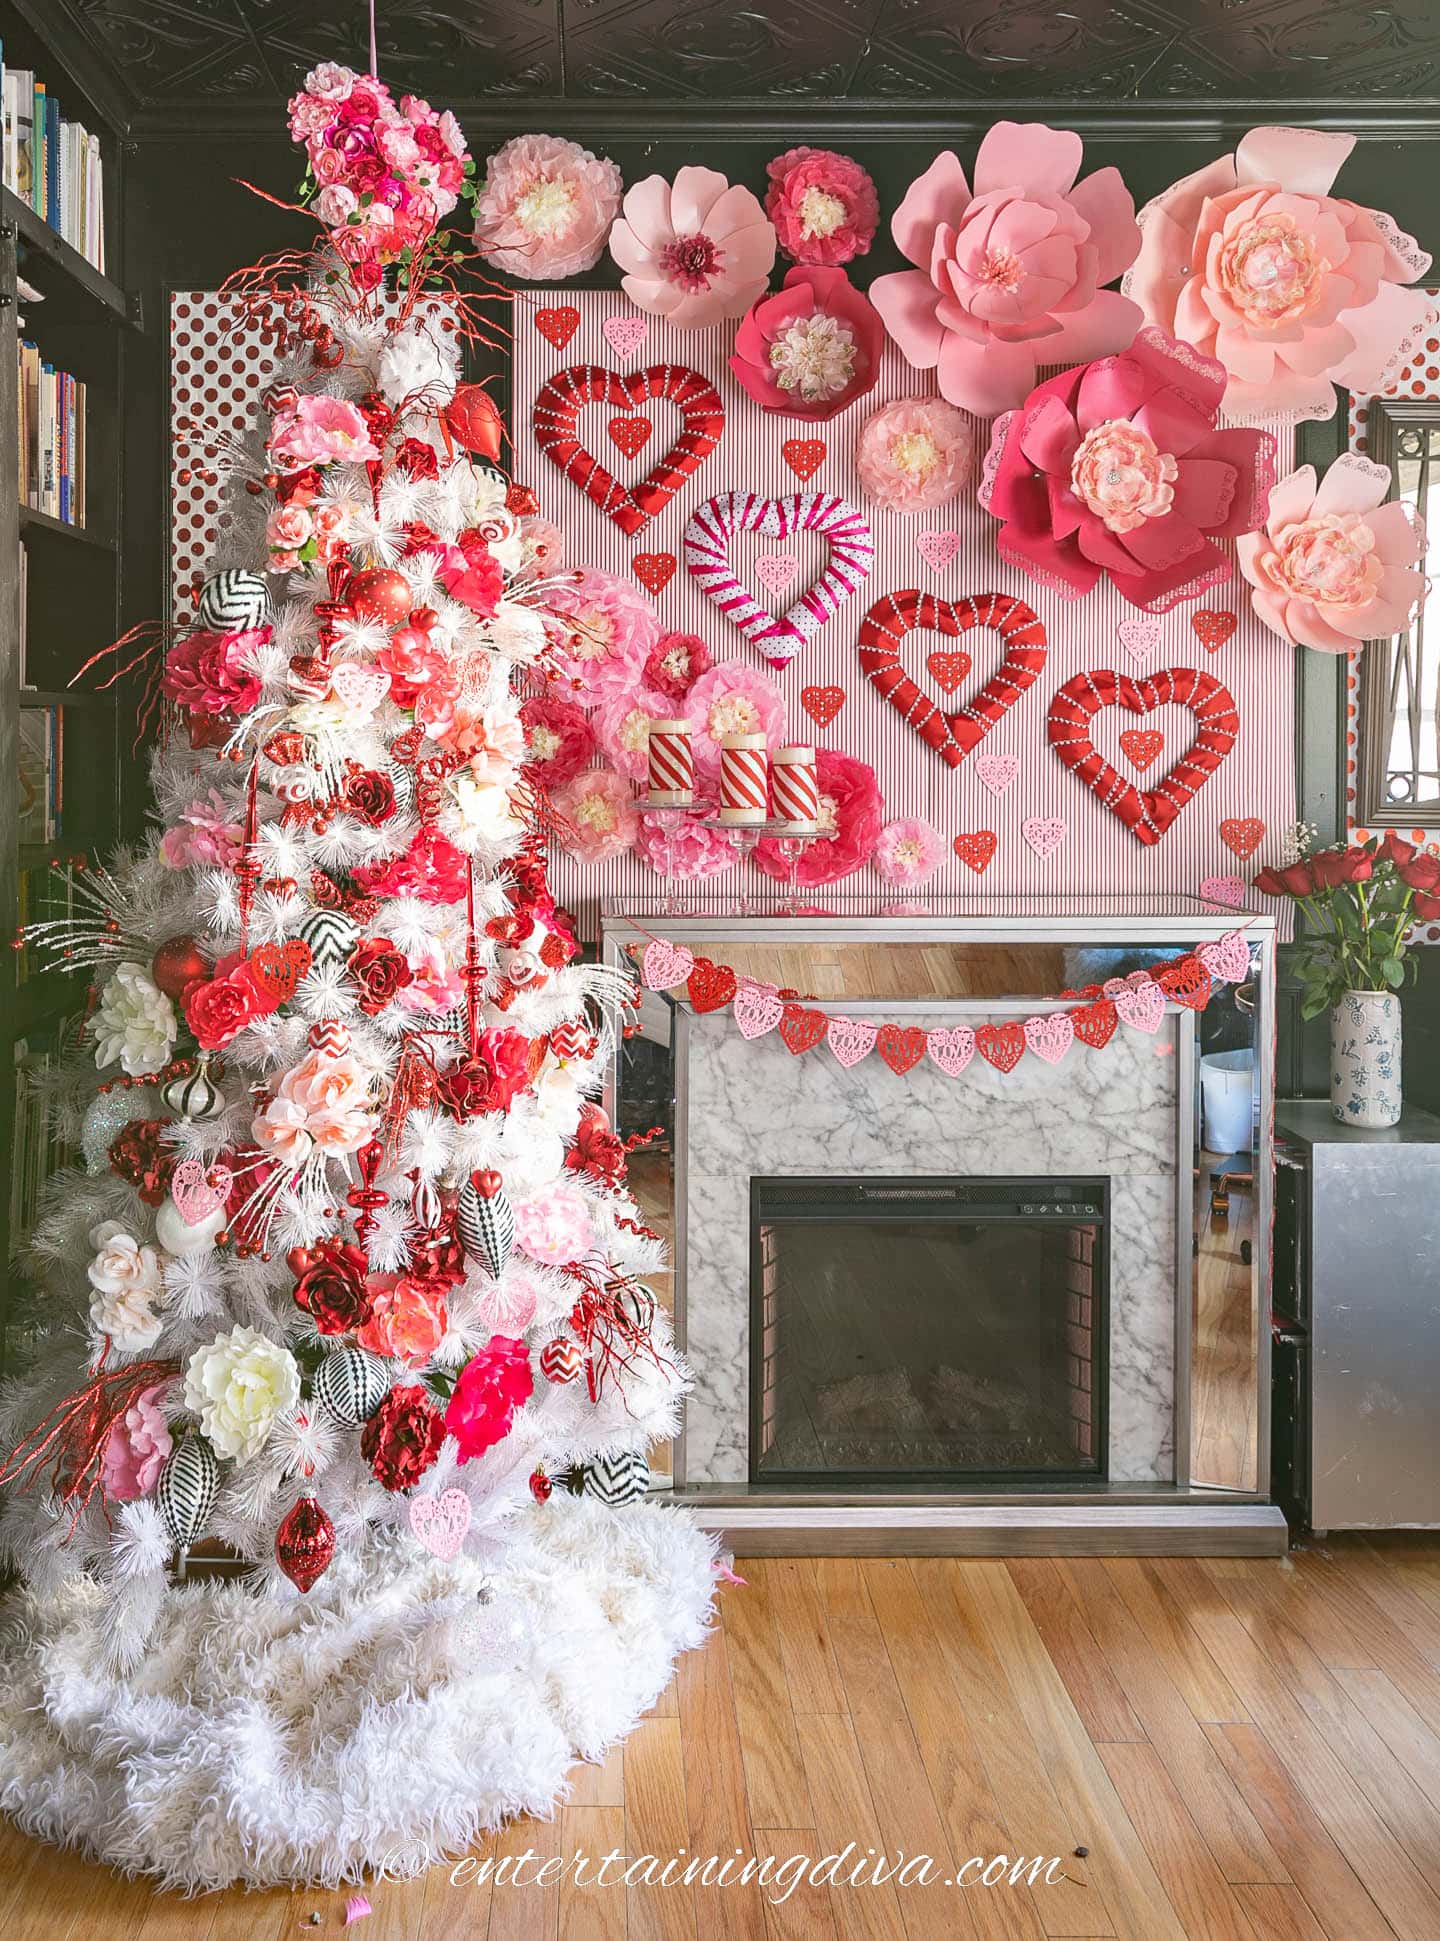 Hearts and roses Valentine's Day decor around a fireplace with a Valentine tree, DIY wreaths, large paper flowers, candles and a garland